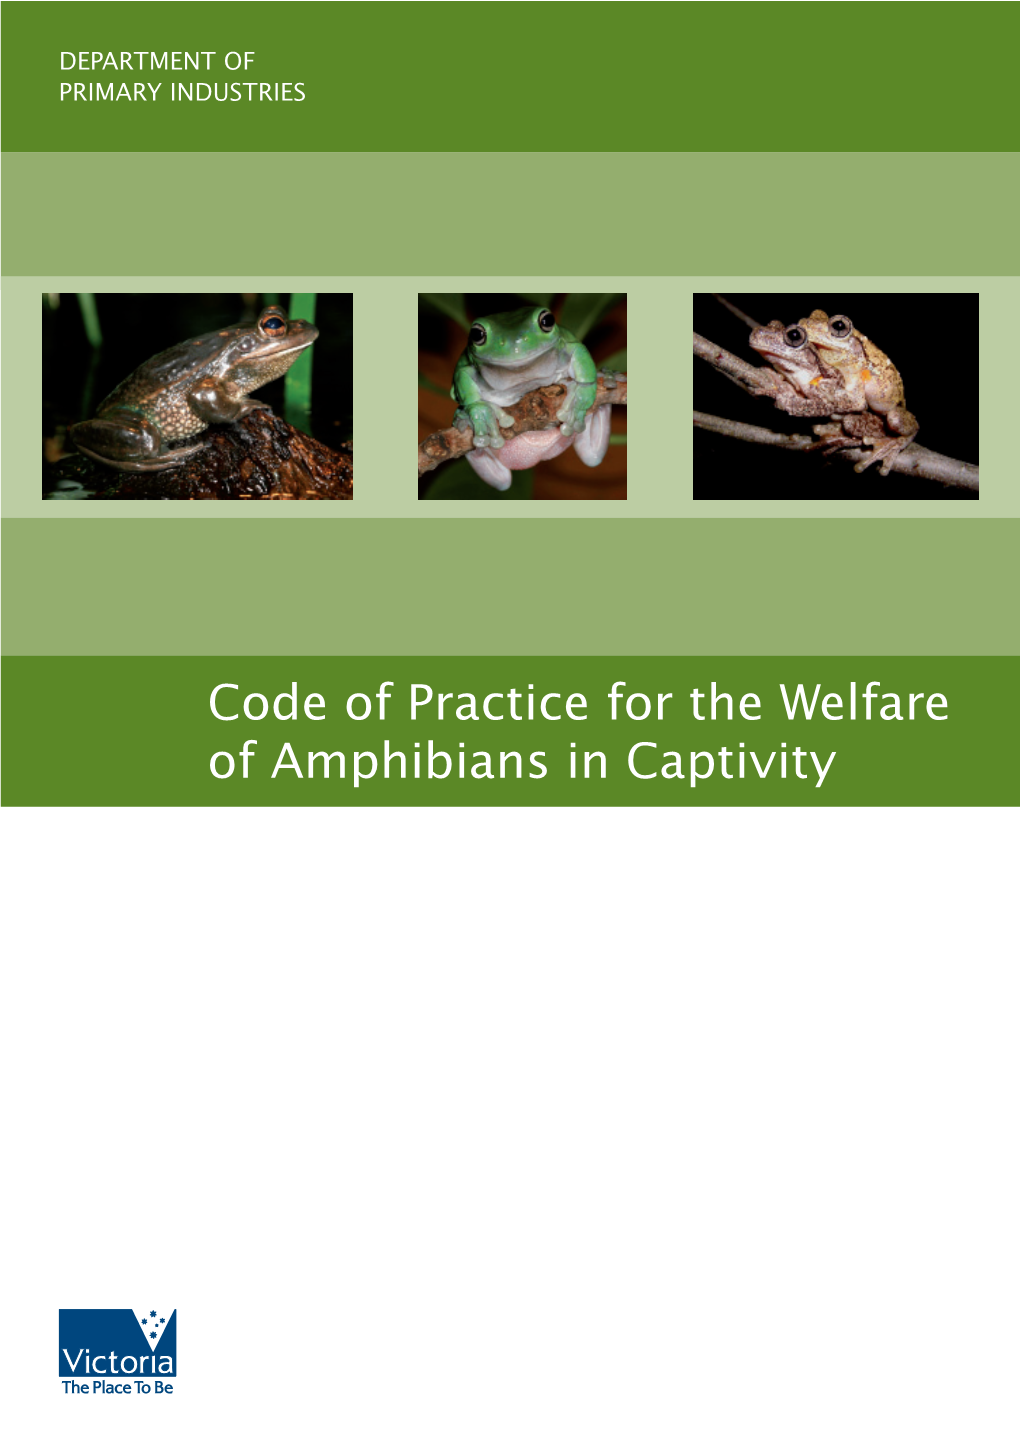 Amphibian Code of Practice July 06.Indd